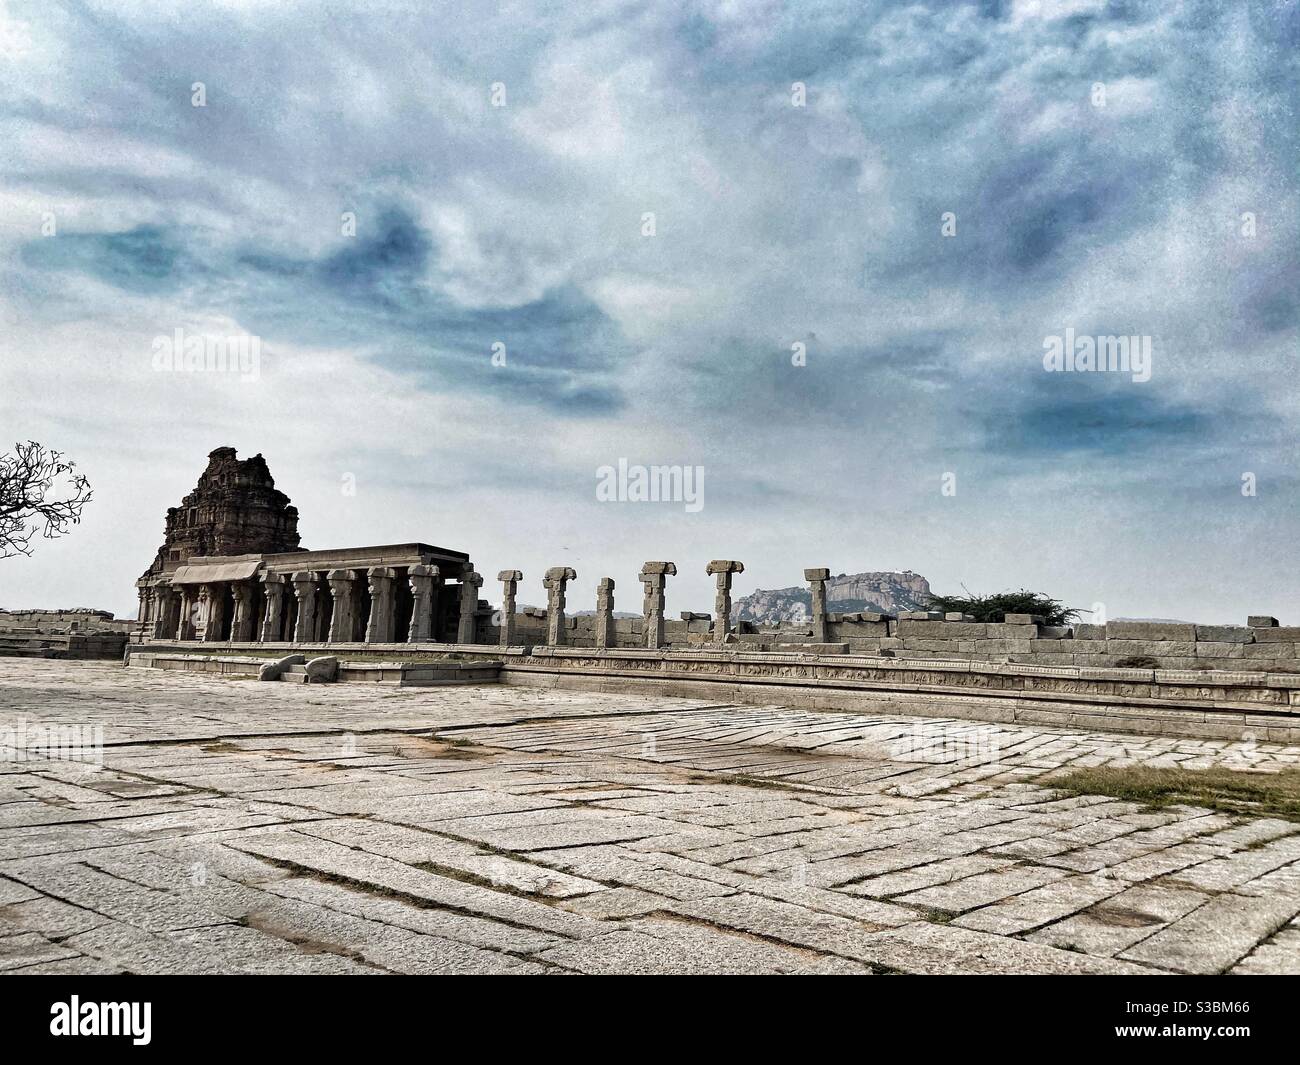 The beautiful Vijaya Vittala Temple in Hampi is known for its ancient architecture. Stock Photo